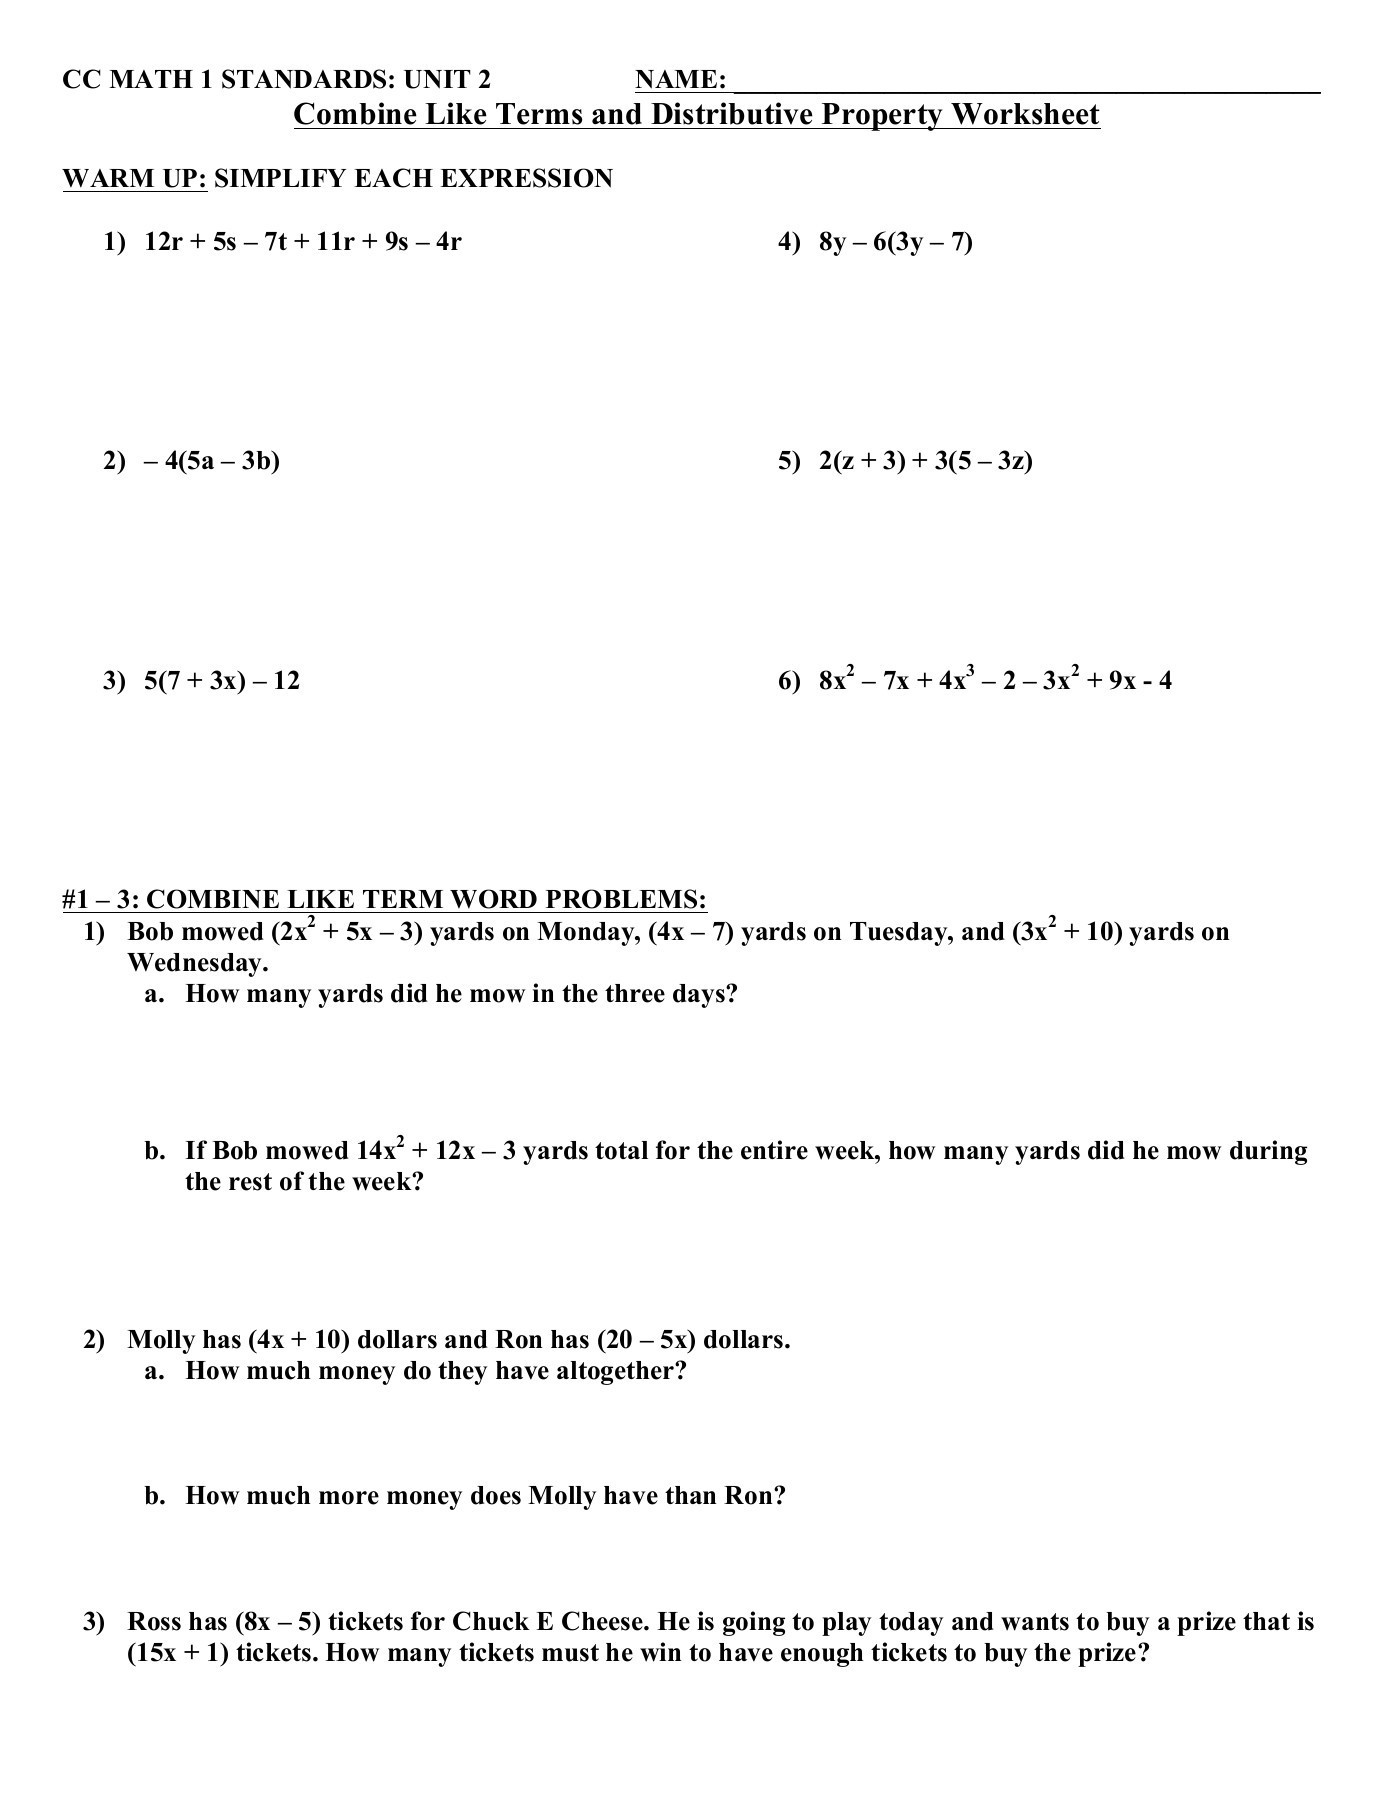 Combining Like Terms Worksheet Pdf Bine Like Terms and Distributive Property Worksheet Pages